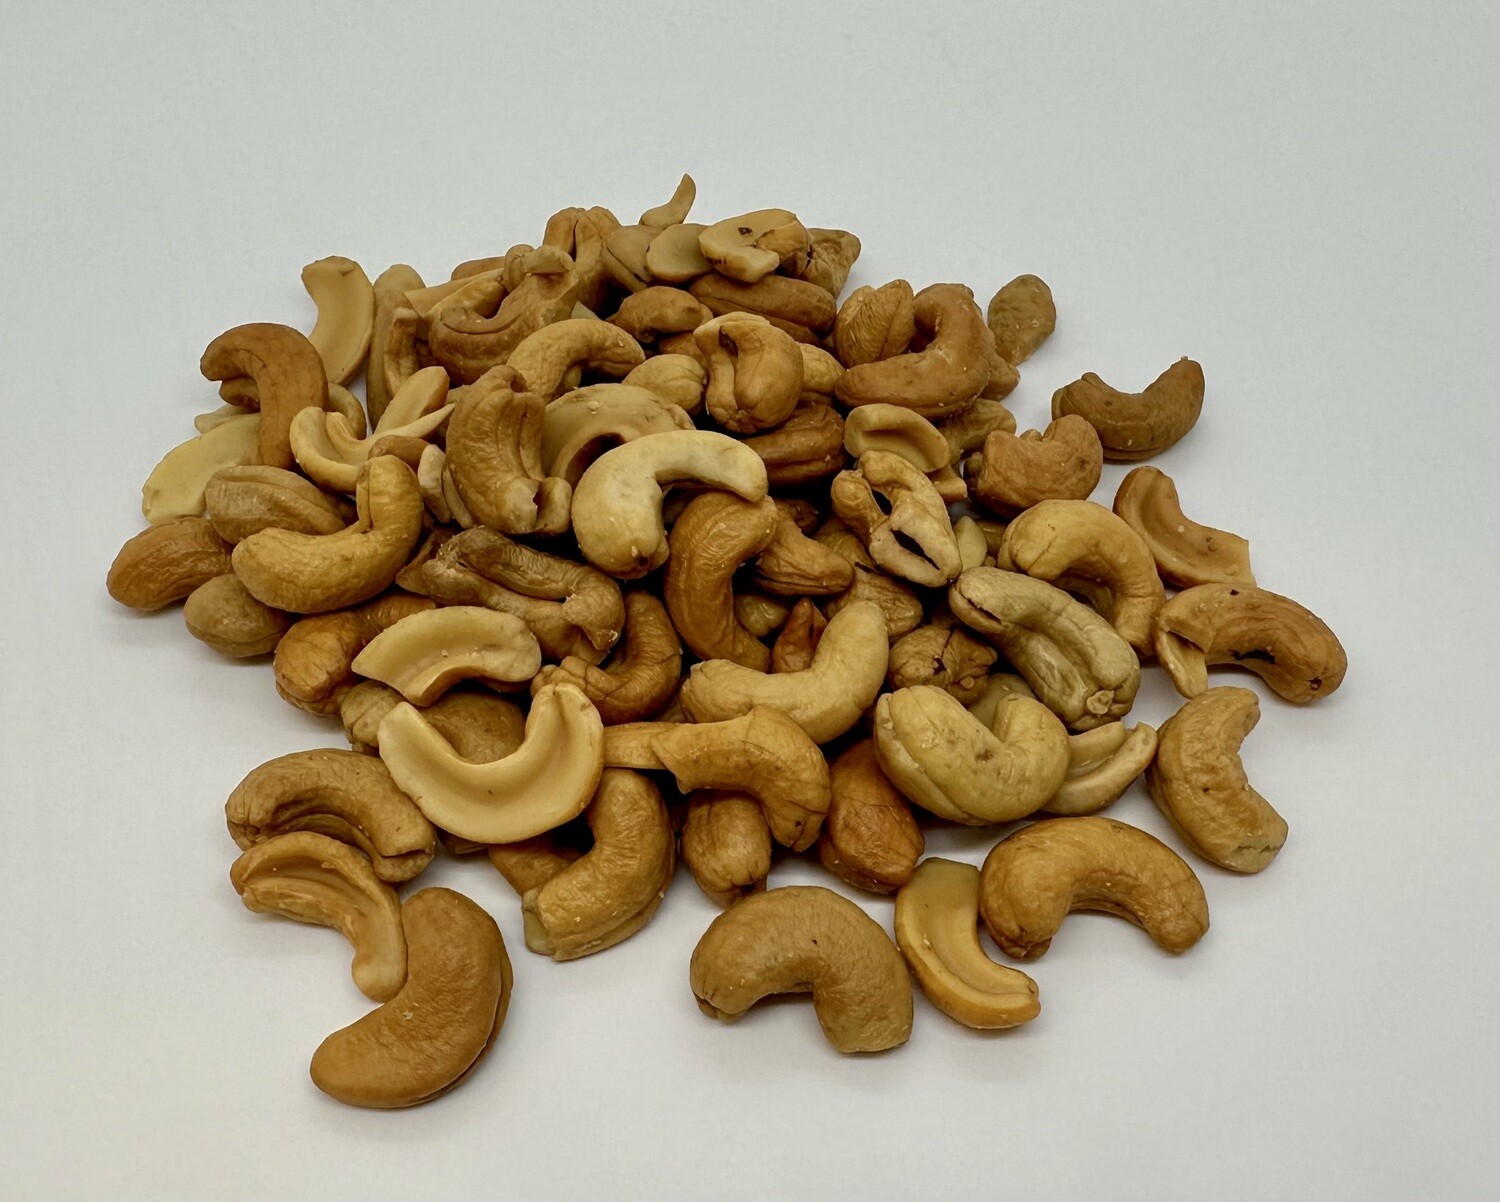 Box of Roasted Cashew Nuts 1 lb. Unsalted